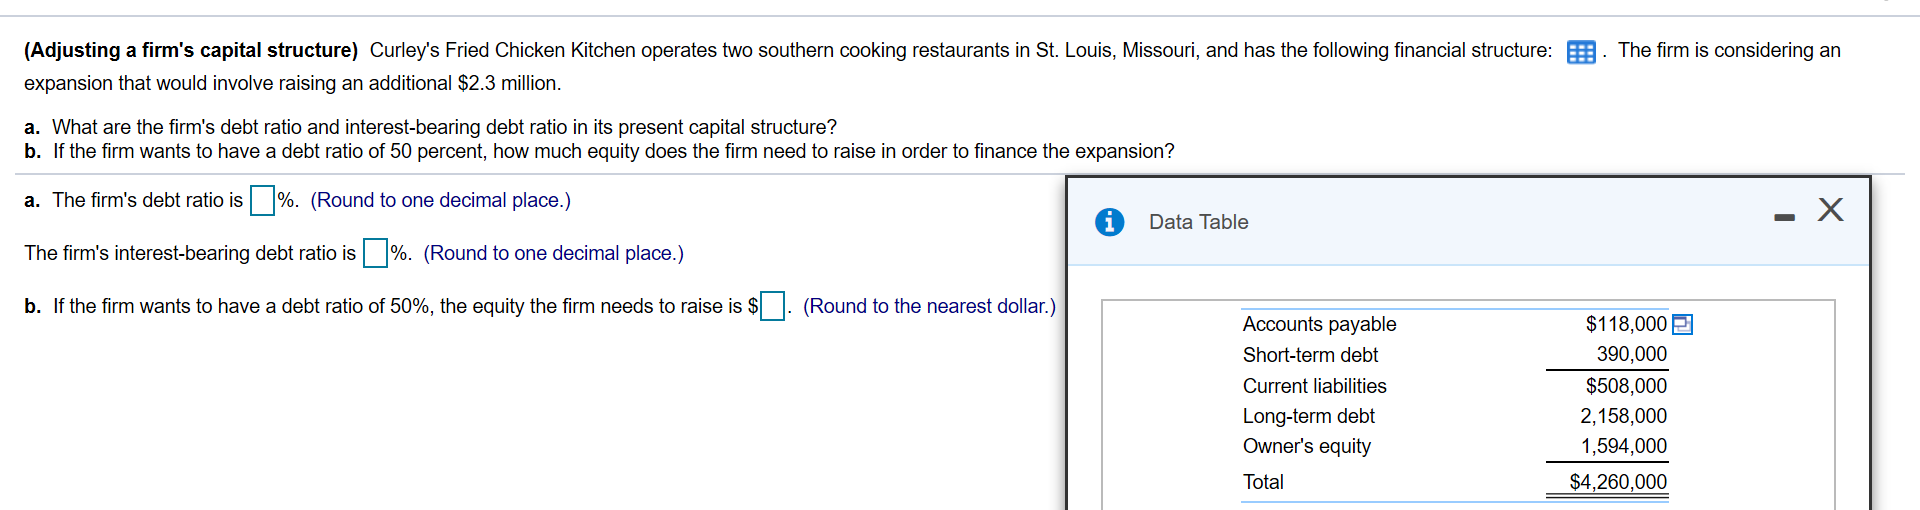 The firm is considering an
(Adjusting a firm's capital structure) Curley's Fried Chicken Kitchen operates two southern cooking restaurants in St. Louis, Missouri, and has the following financial structure: E
expansion that would involve raising an additional $2.3 million.
a. What are the firm's debt ratio and interest-bearing debt ratio in its present capital structure?
b. If the firm wants to have a debt ratio of 50 percent, how much equity does the firm need to raise in order to finance the expansion?
%. (Round to one decimal place.)
a. The firm's debt ratio is
Data Table
%. (Round to one decimal place.)
The firm's interest-bearing debt ratio is
b. If the firm wants to have a debt ratio of 50%, the equity the firm needs to raise is $
(Round to the nearest dollar.)
$118,000 2
390,000
Accounts payable
Short-term debt
$508,000
Current liabilities
Long-term debt
Owner's equity
2,158,000
1,594,000
$4,260,000
Total
